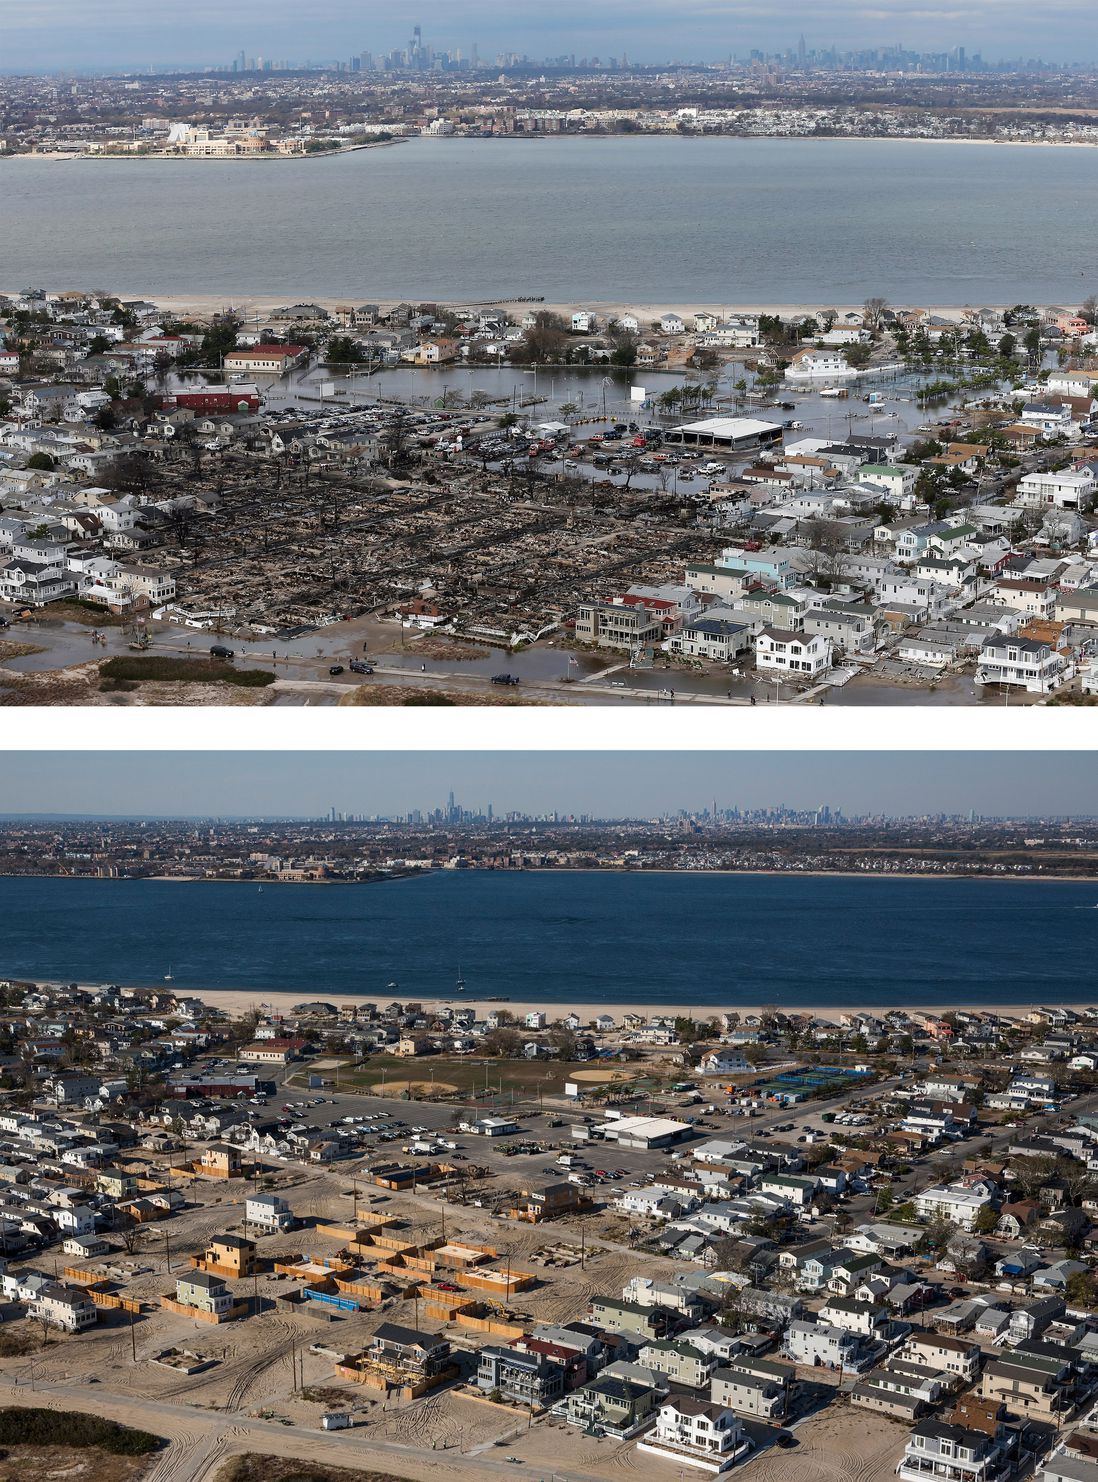 [Top] The remains of burned homes are surrounded by water due to Superstorm Sandy in the Breezy Point neighborhood of the Queens borough of New York City October 31, 2012. [Bottom] Newly built homes and vacant lots are shown in Breezy Point.